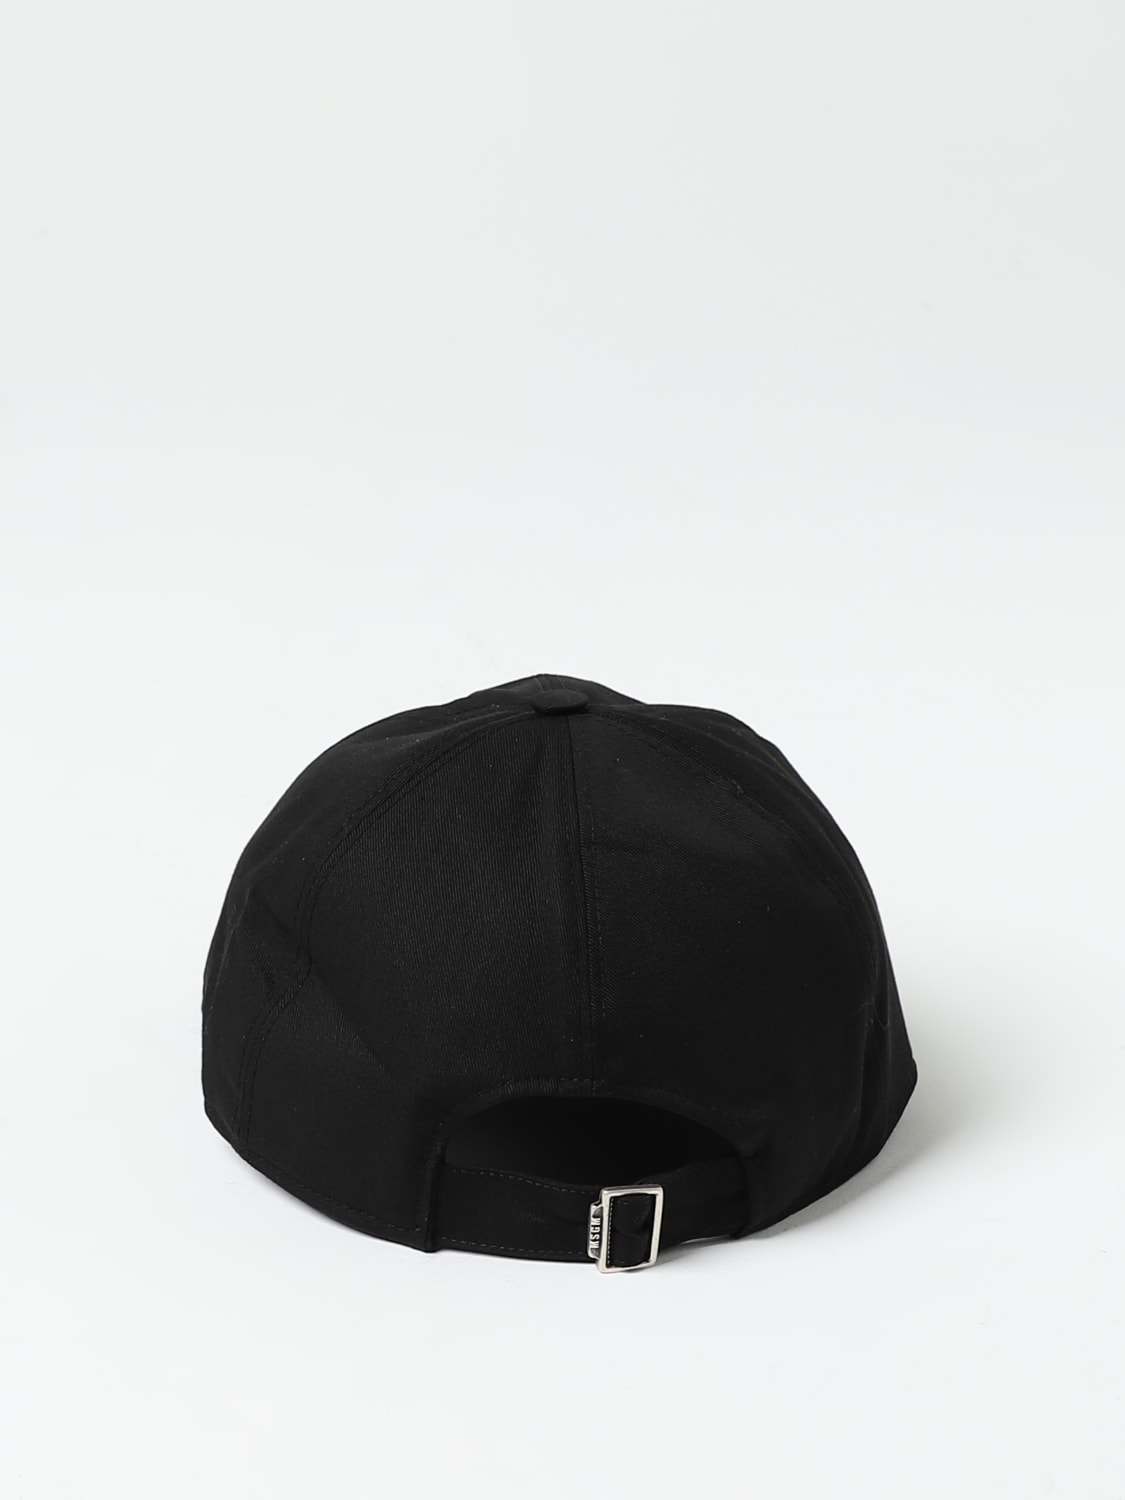 Msgm hat in cotton